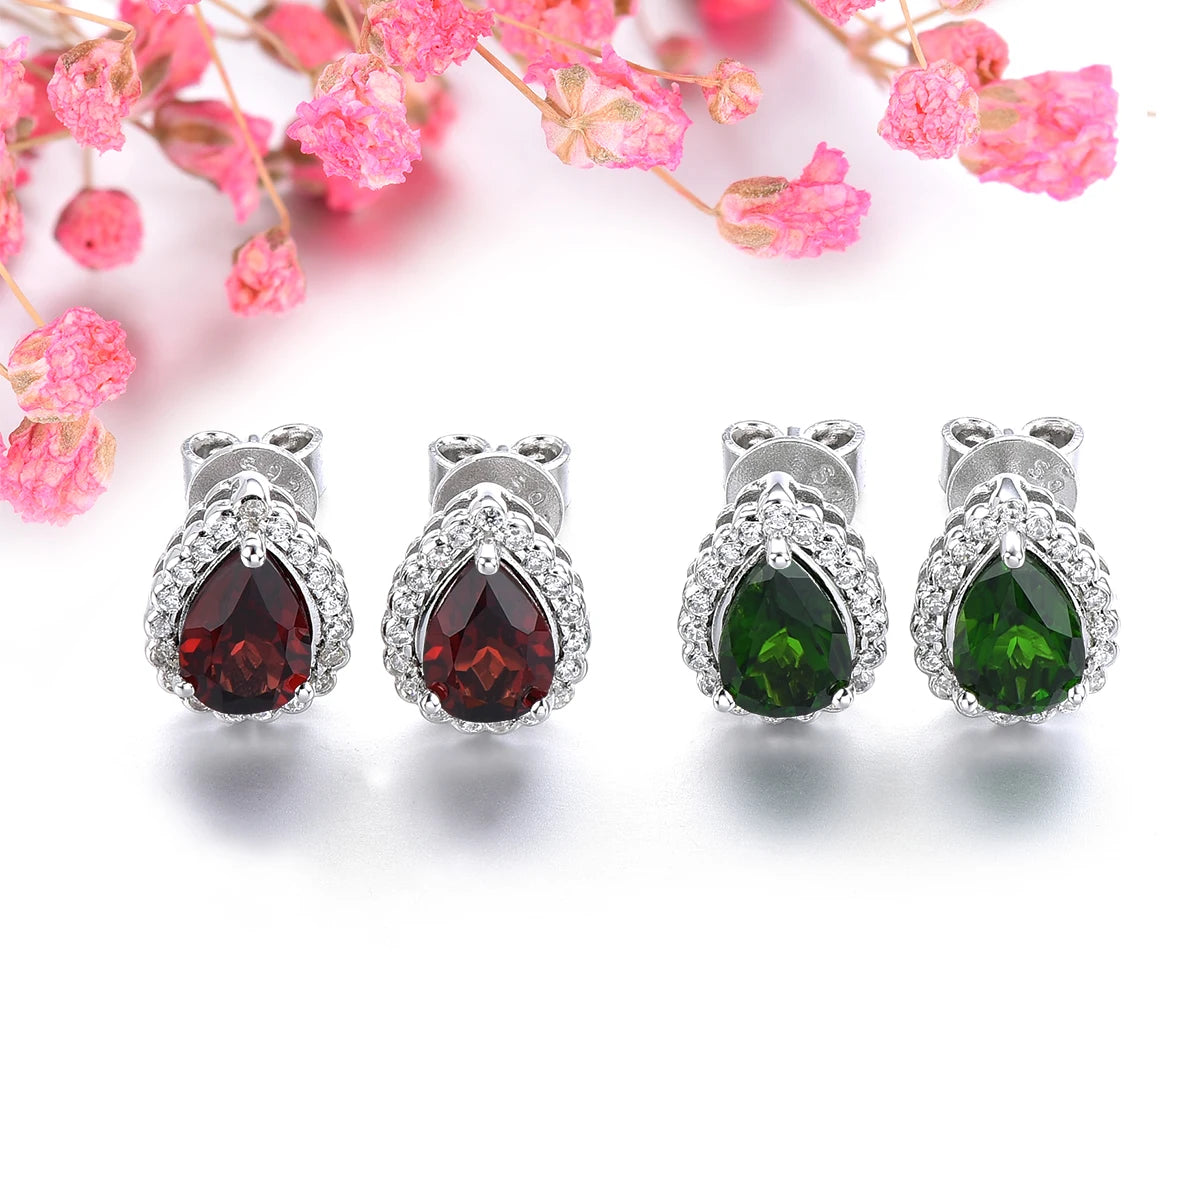 Natural Red Garnet Sterling Silver Stud Earring 1.8 Carats Genuine Gemstone Classic Romantic S925 Fine Jewelrys Women Gifts